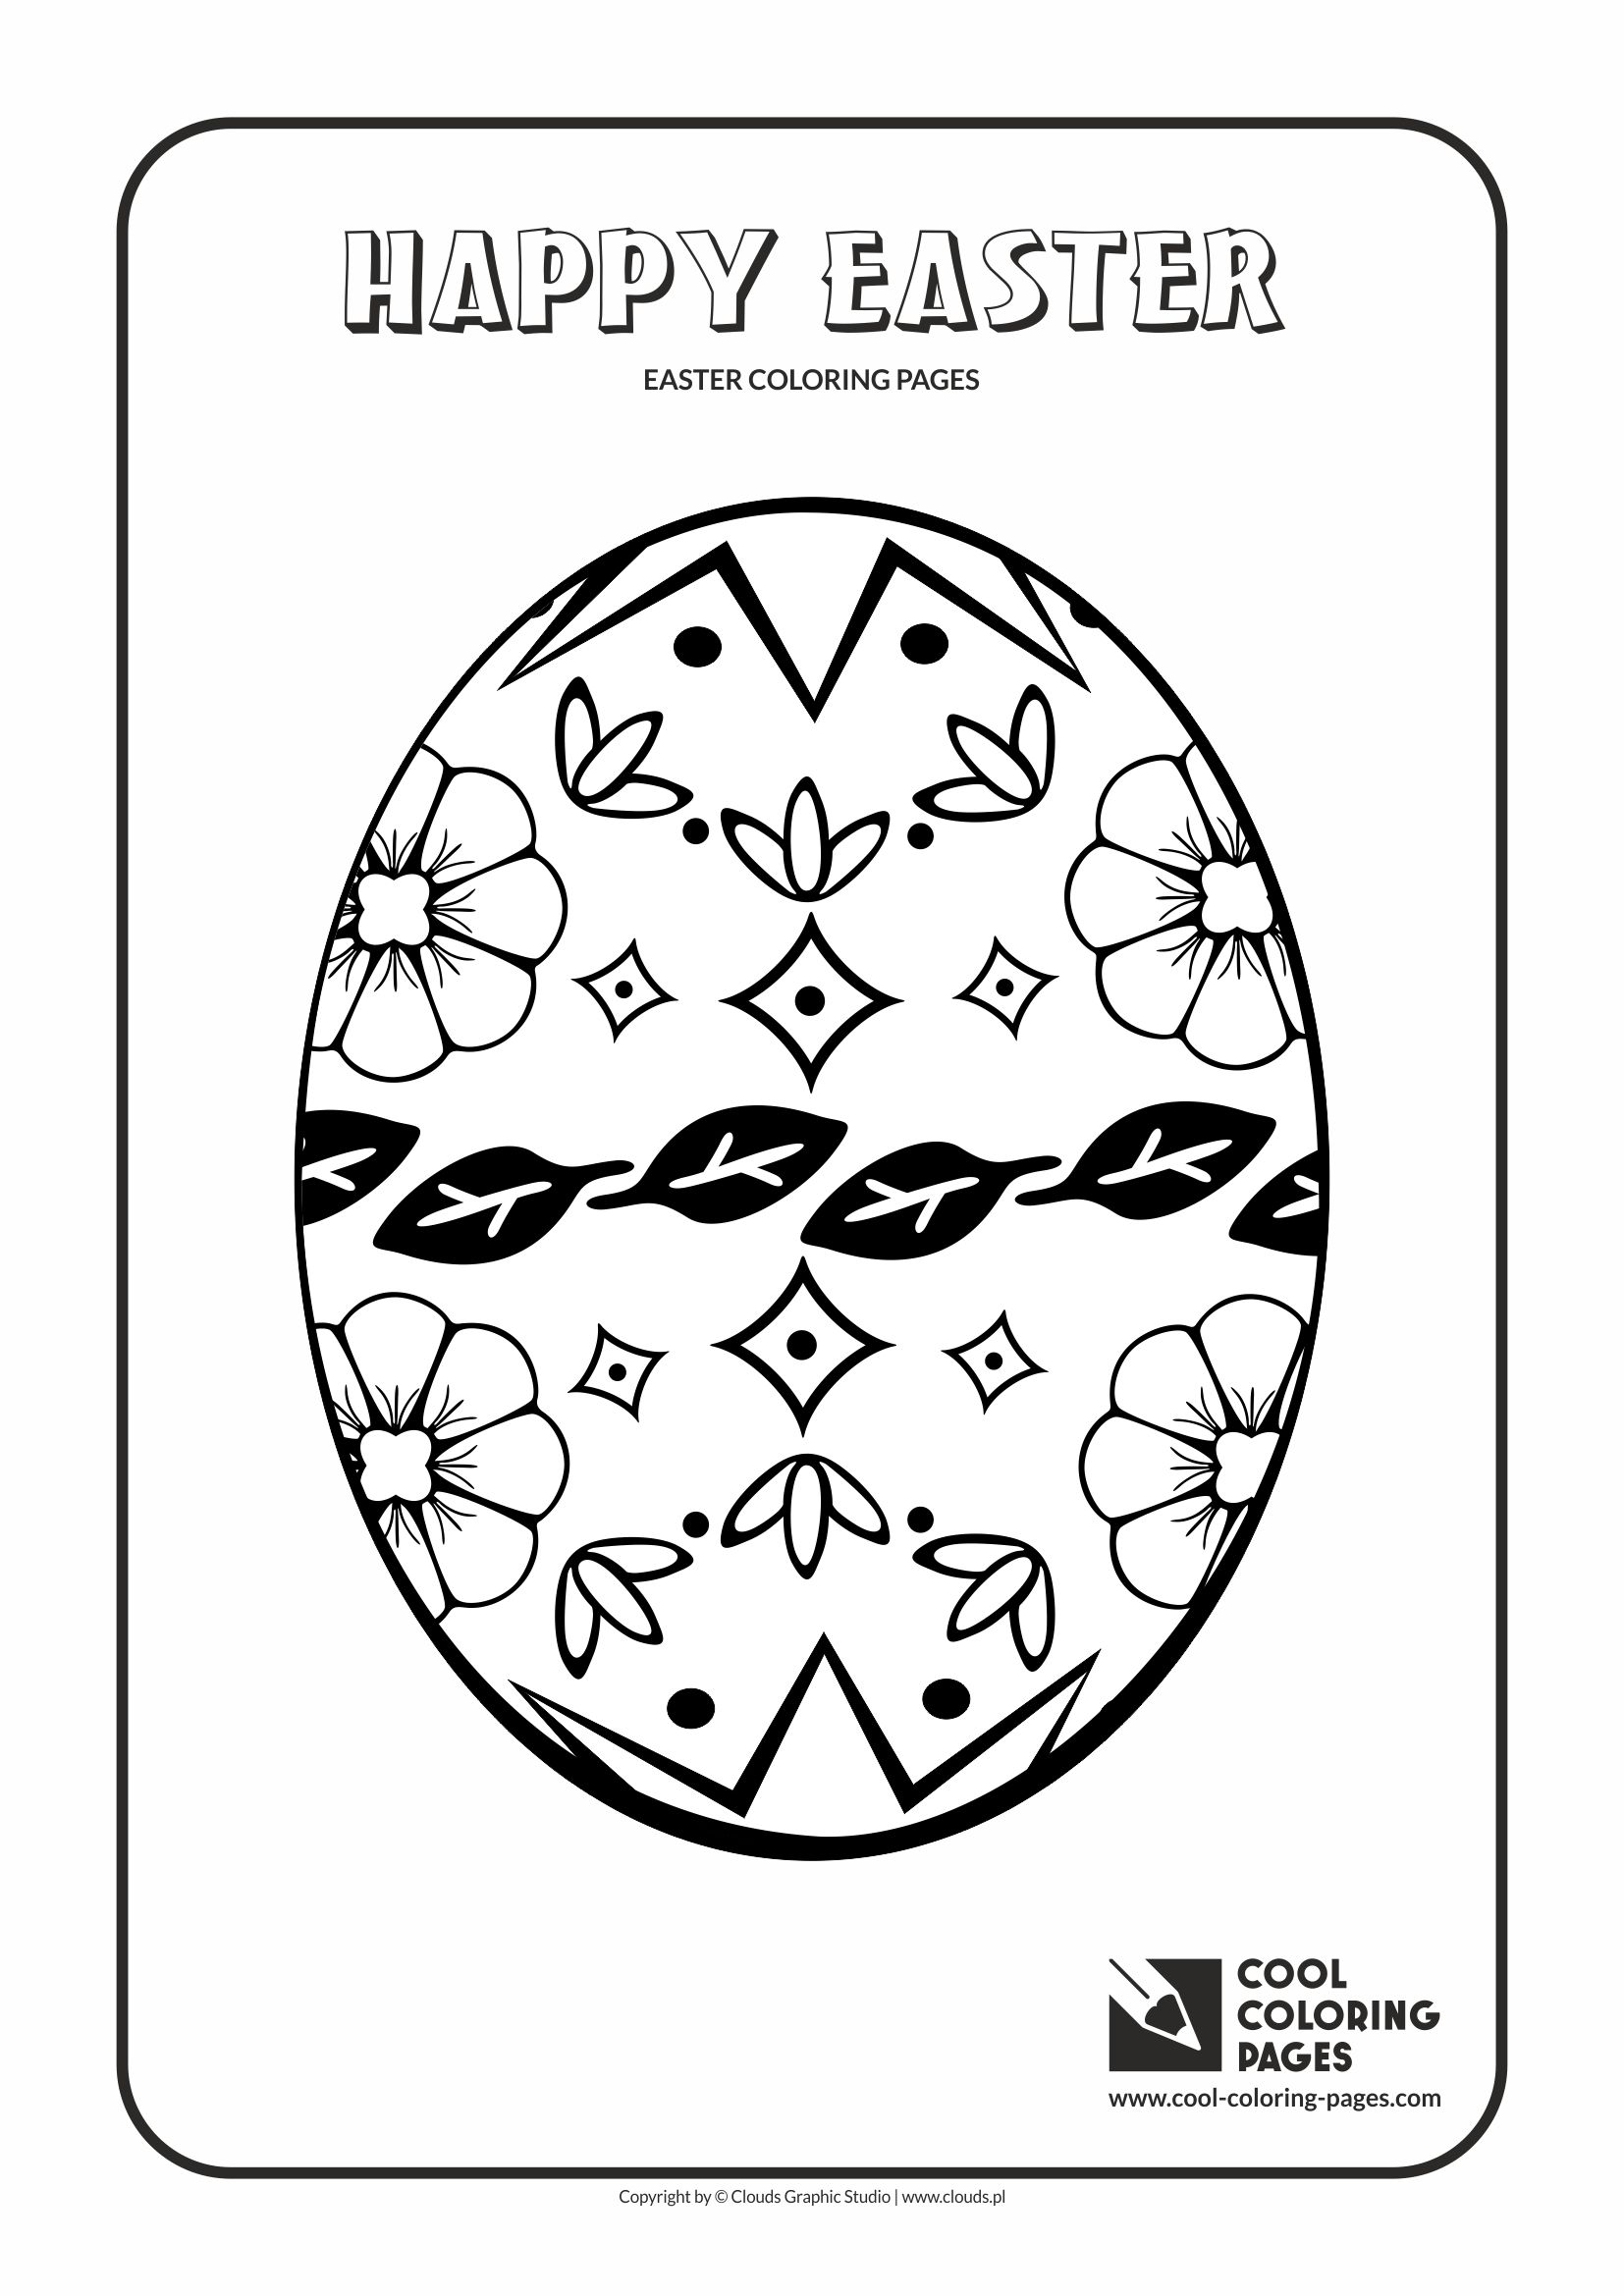 Cool Coloring Pages - Holidays / Easter egg no 3 / Coloring page with Easter egg no 3